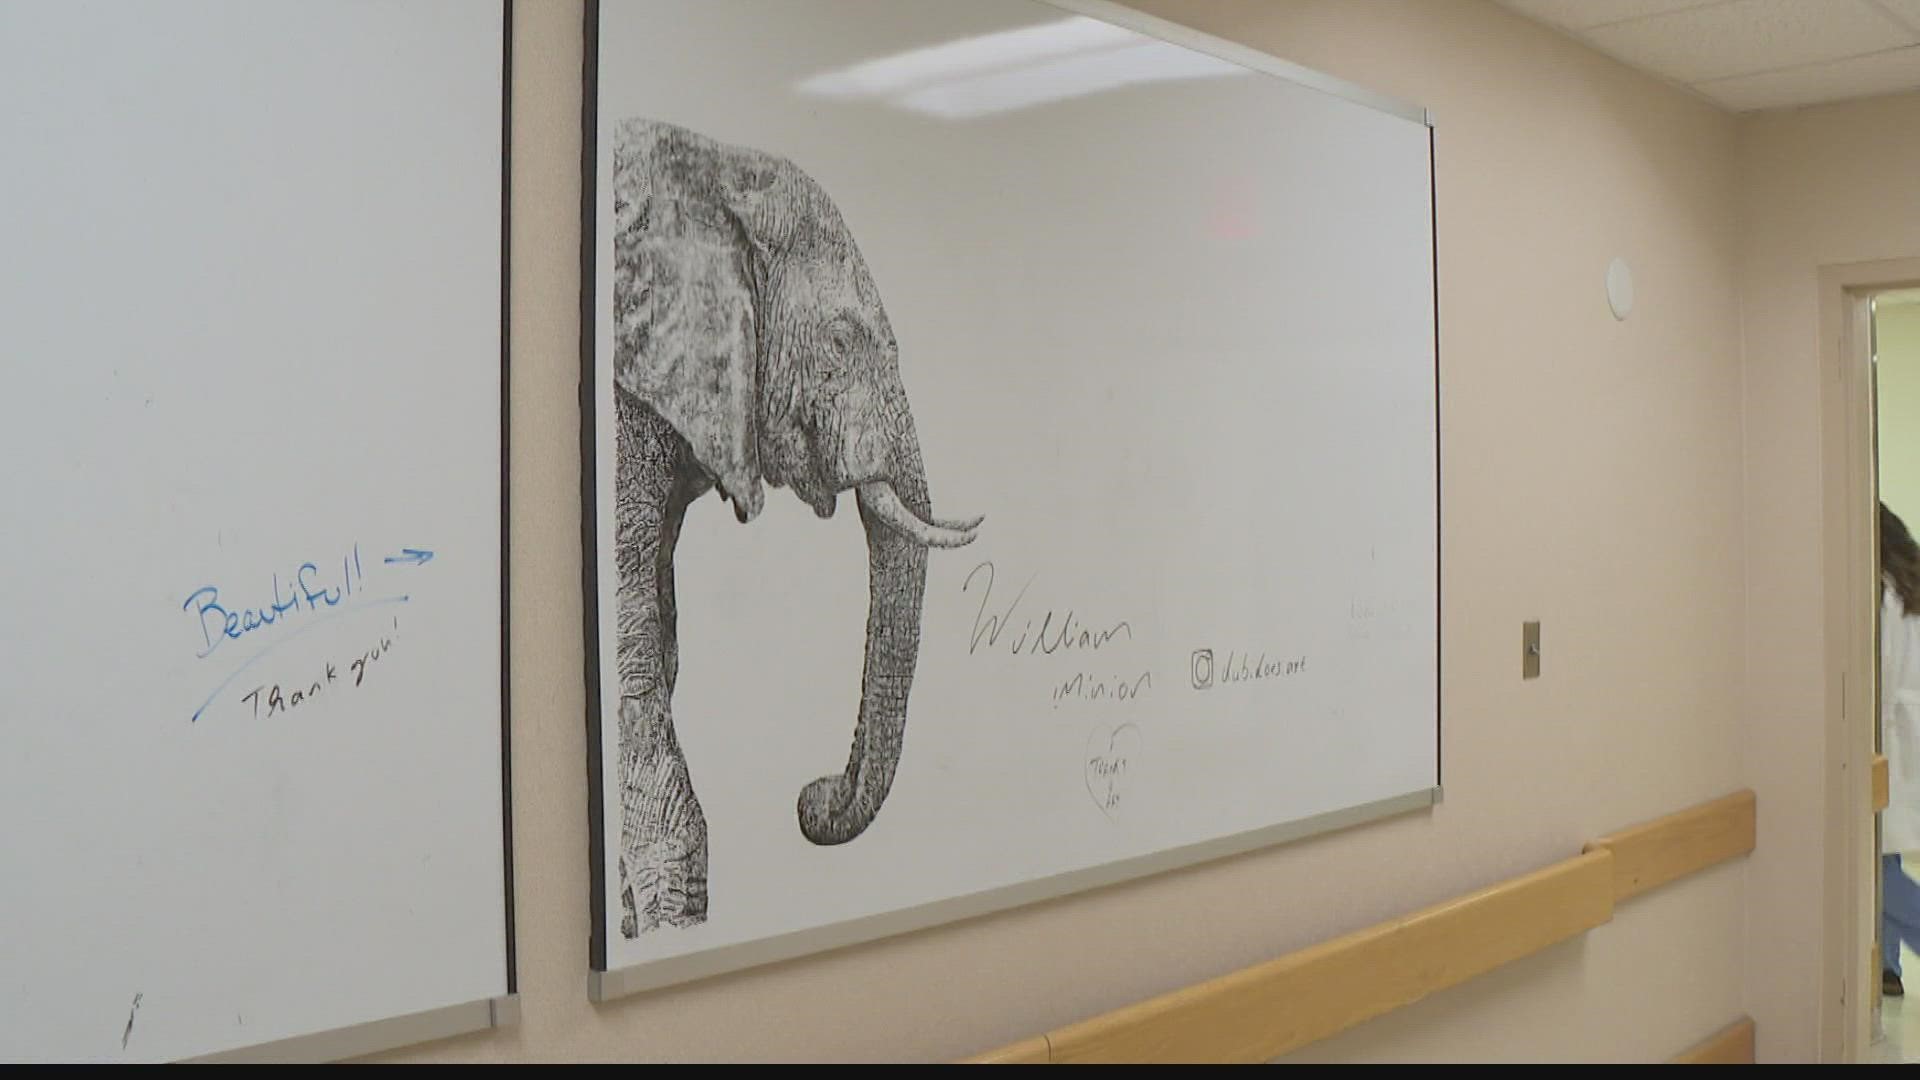 Incredible artwork on whiteboards appearing throughout University Hospital is leaving a meaningful mark.